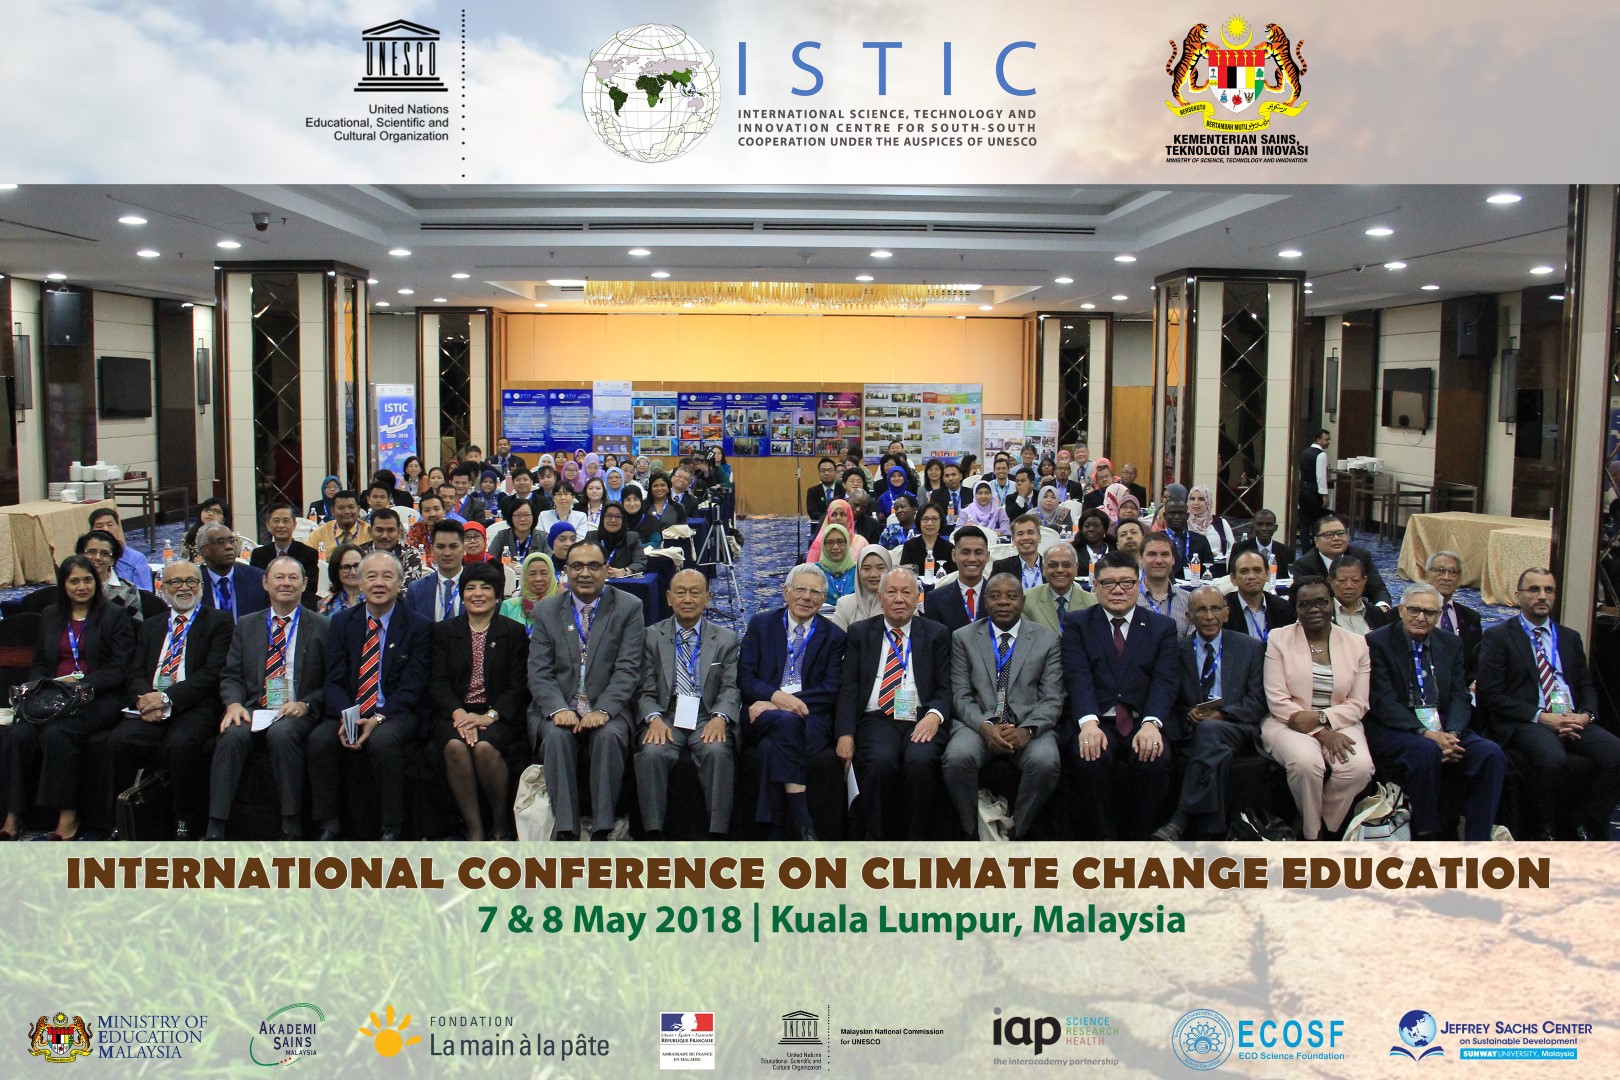 Group photo of officials, speakers and participants